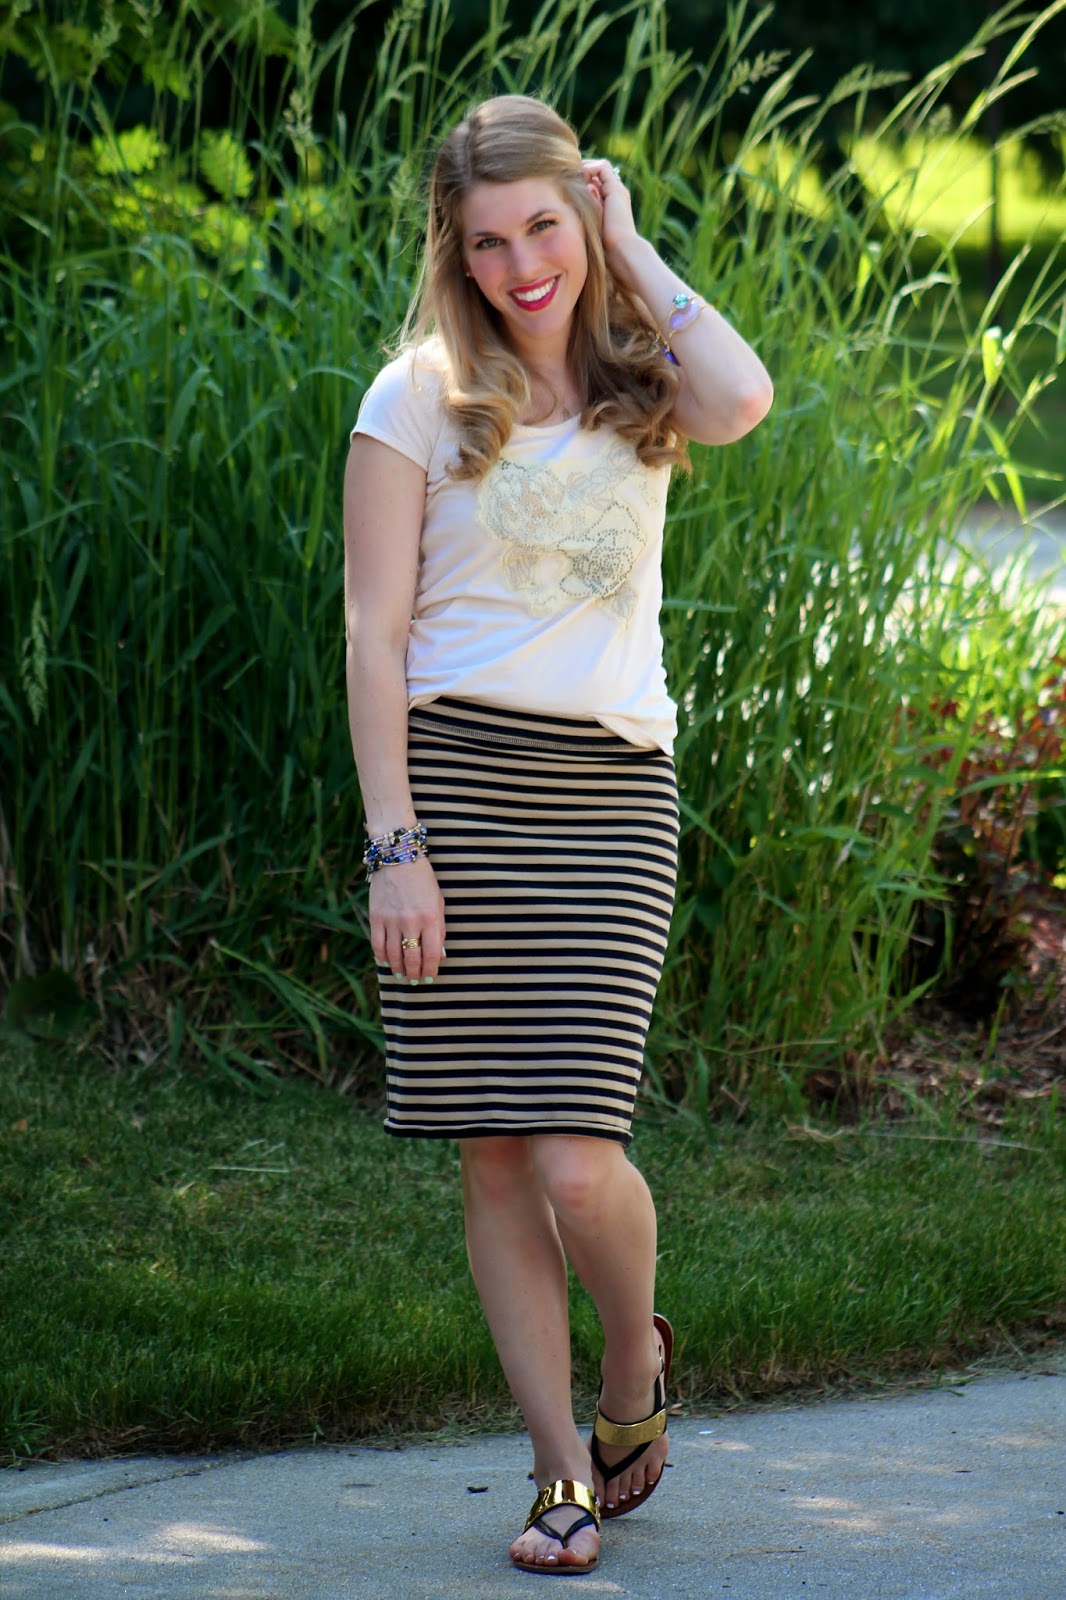 I do deClaire: Striped Skirt and Graphic Tee